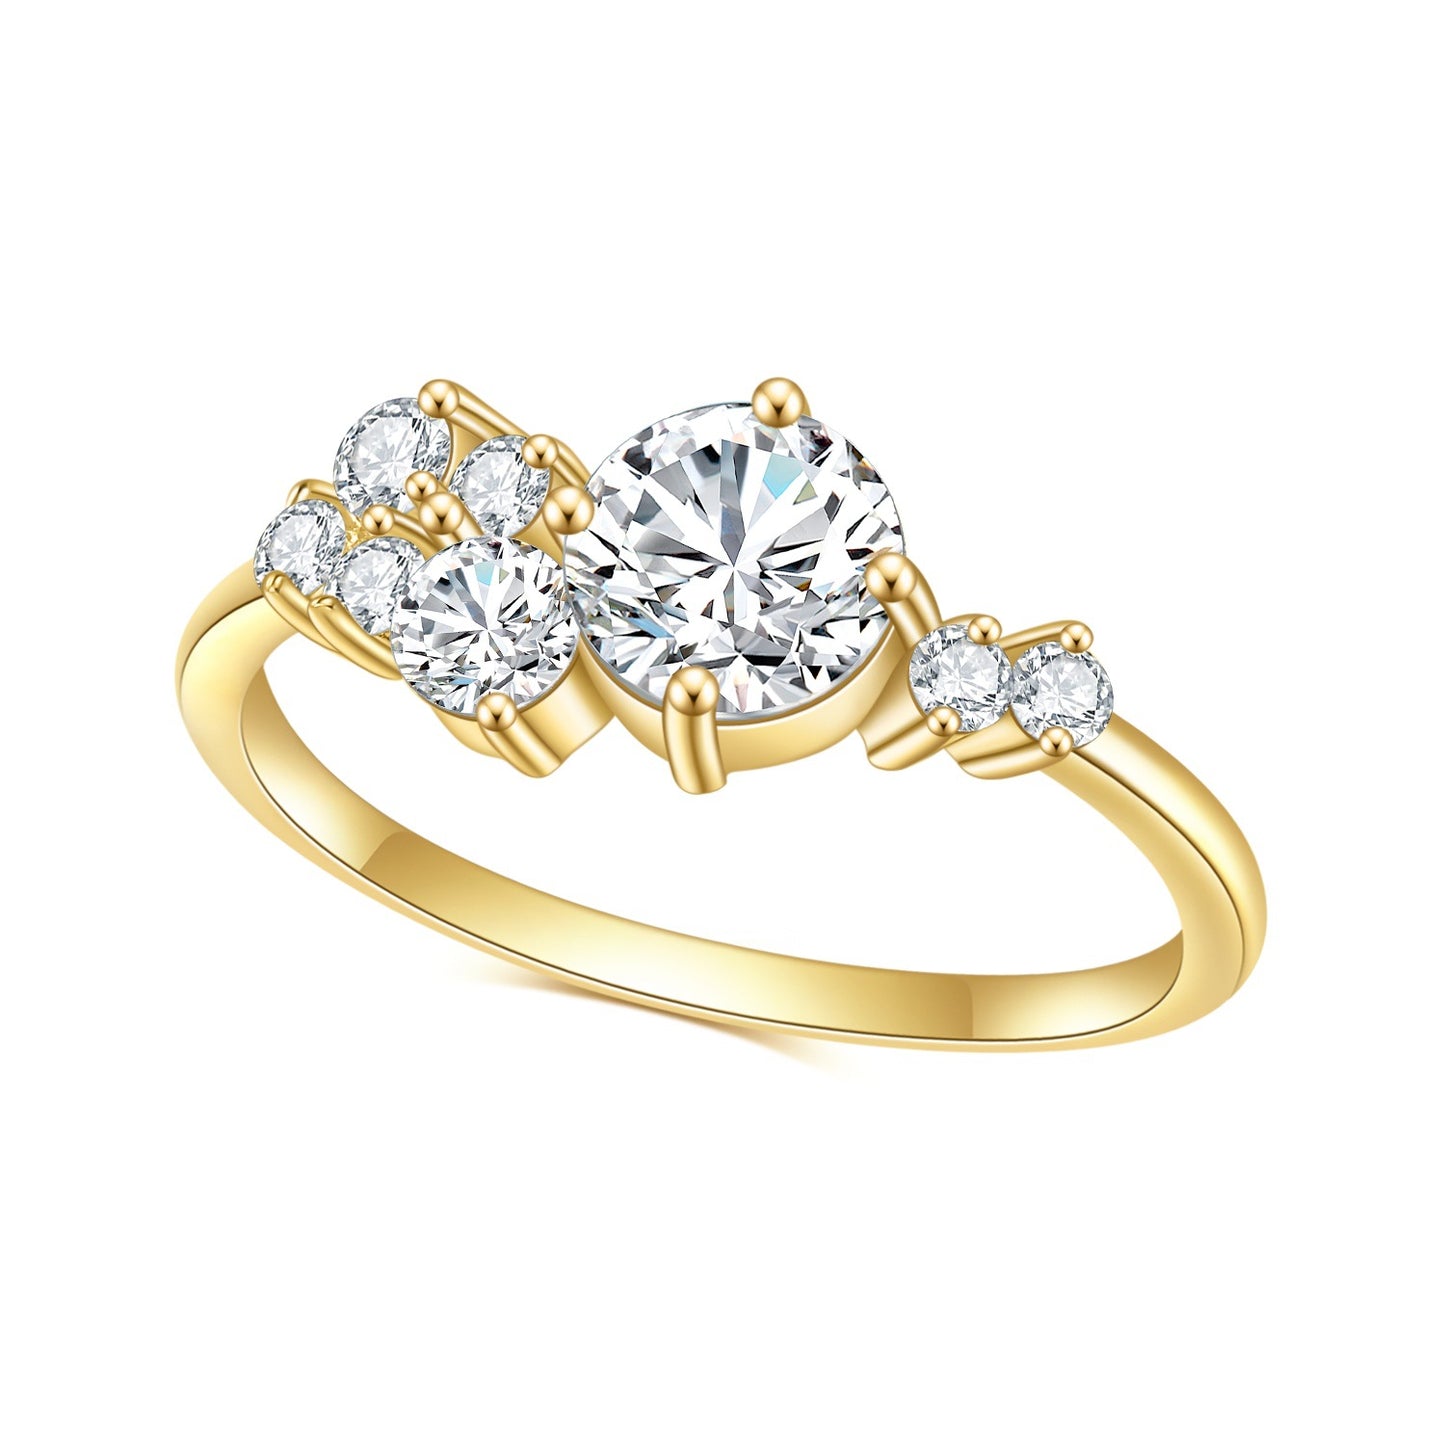 Golden 14k gold plated on S925 Sterling Silver with Zircon Ring for Women